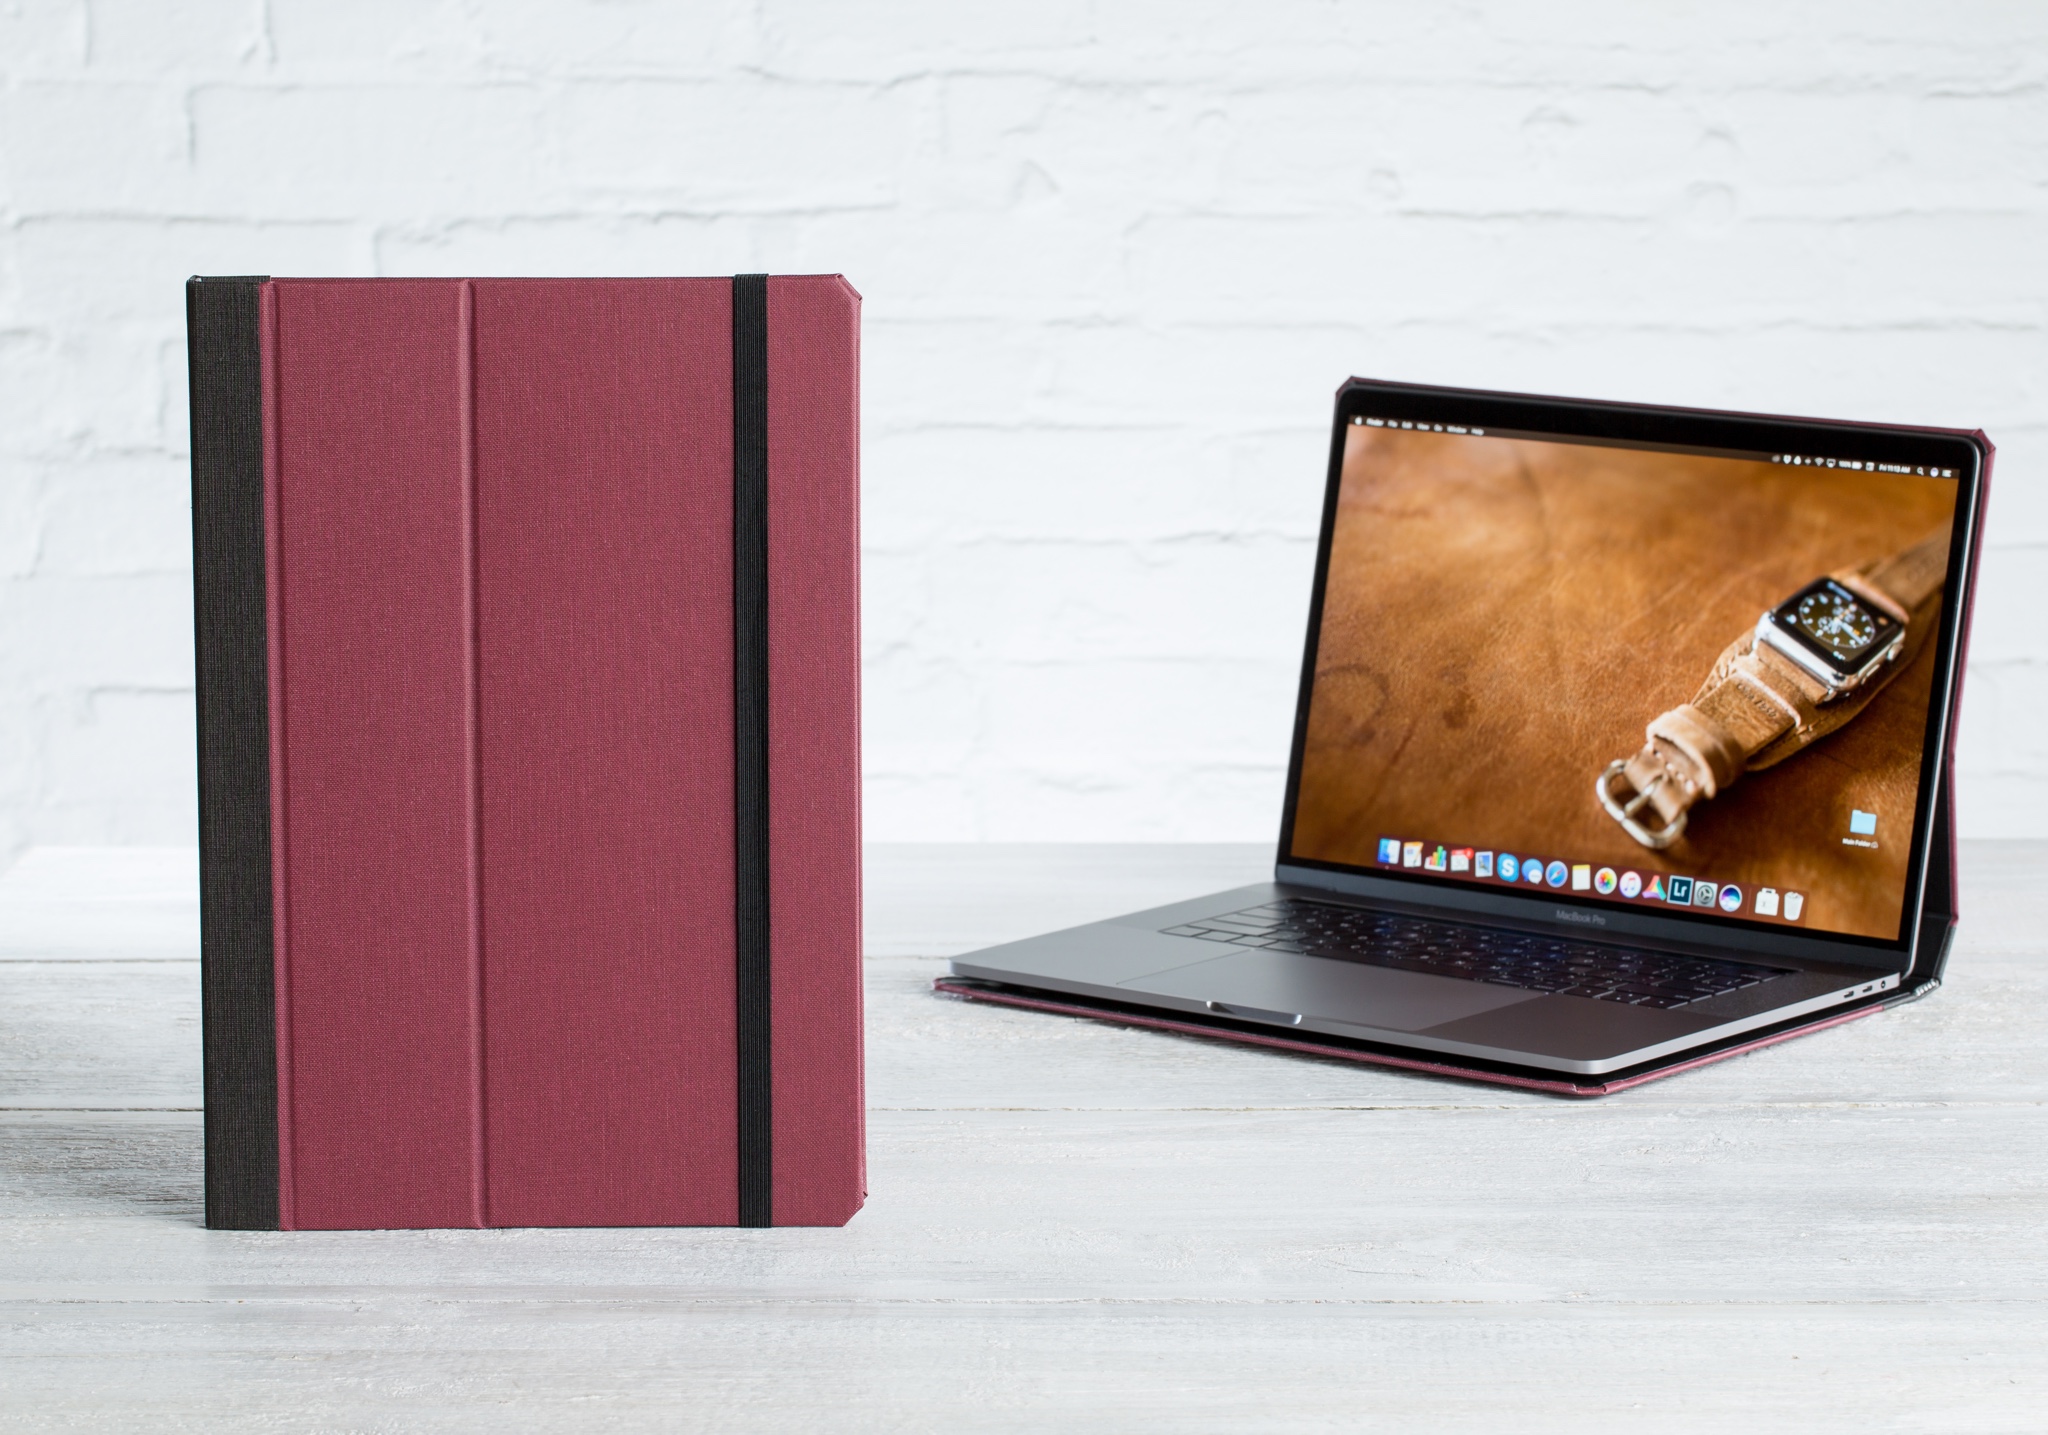 Pad & Quill's Cartella Slim Case Puts the Book Back Into the 2016 MacBook Pro